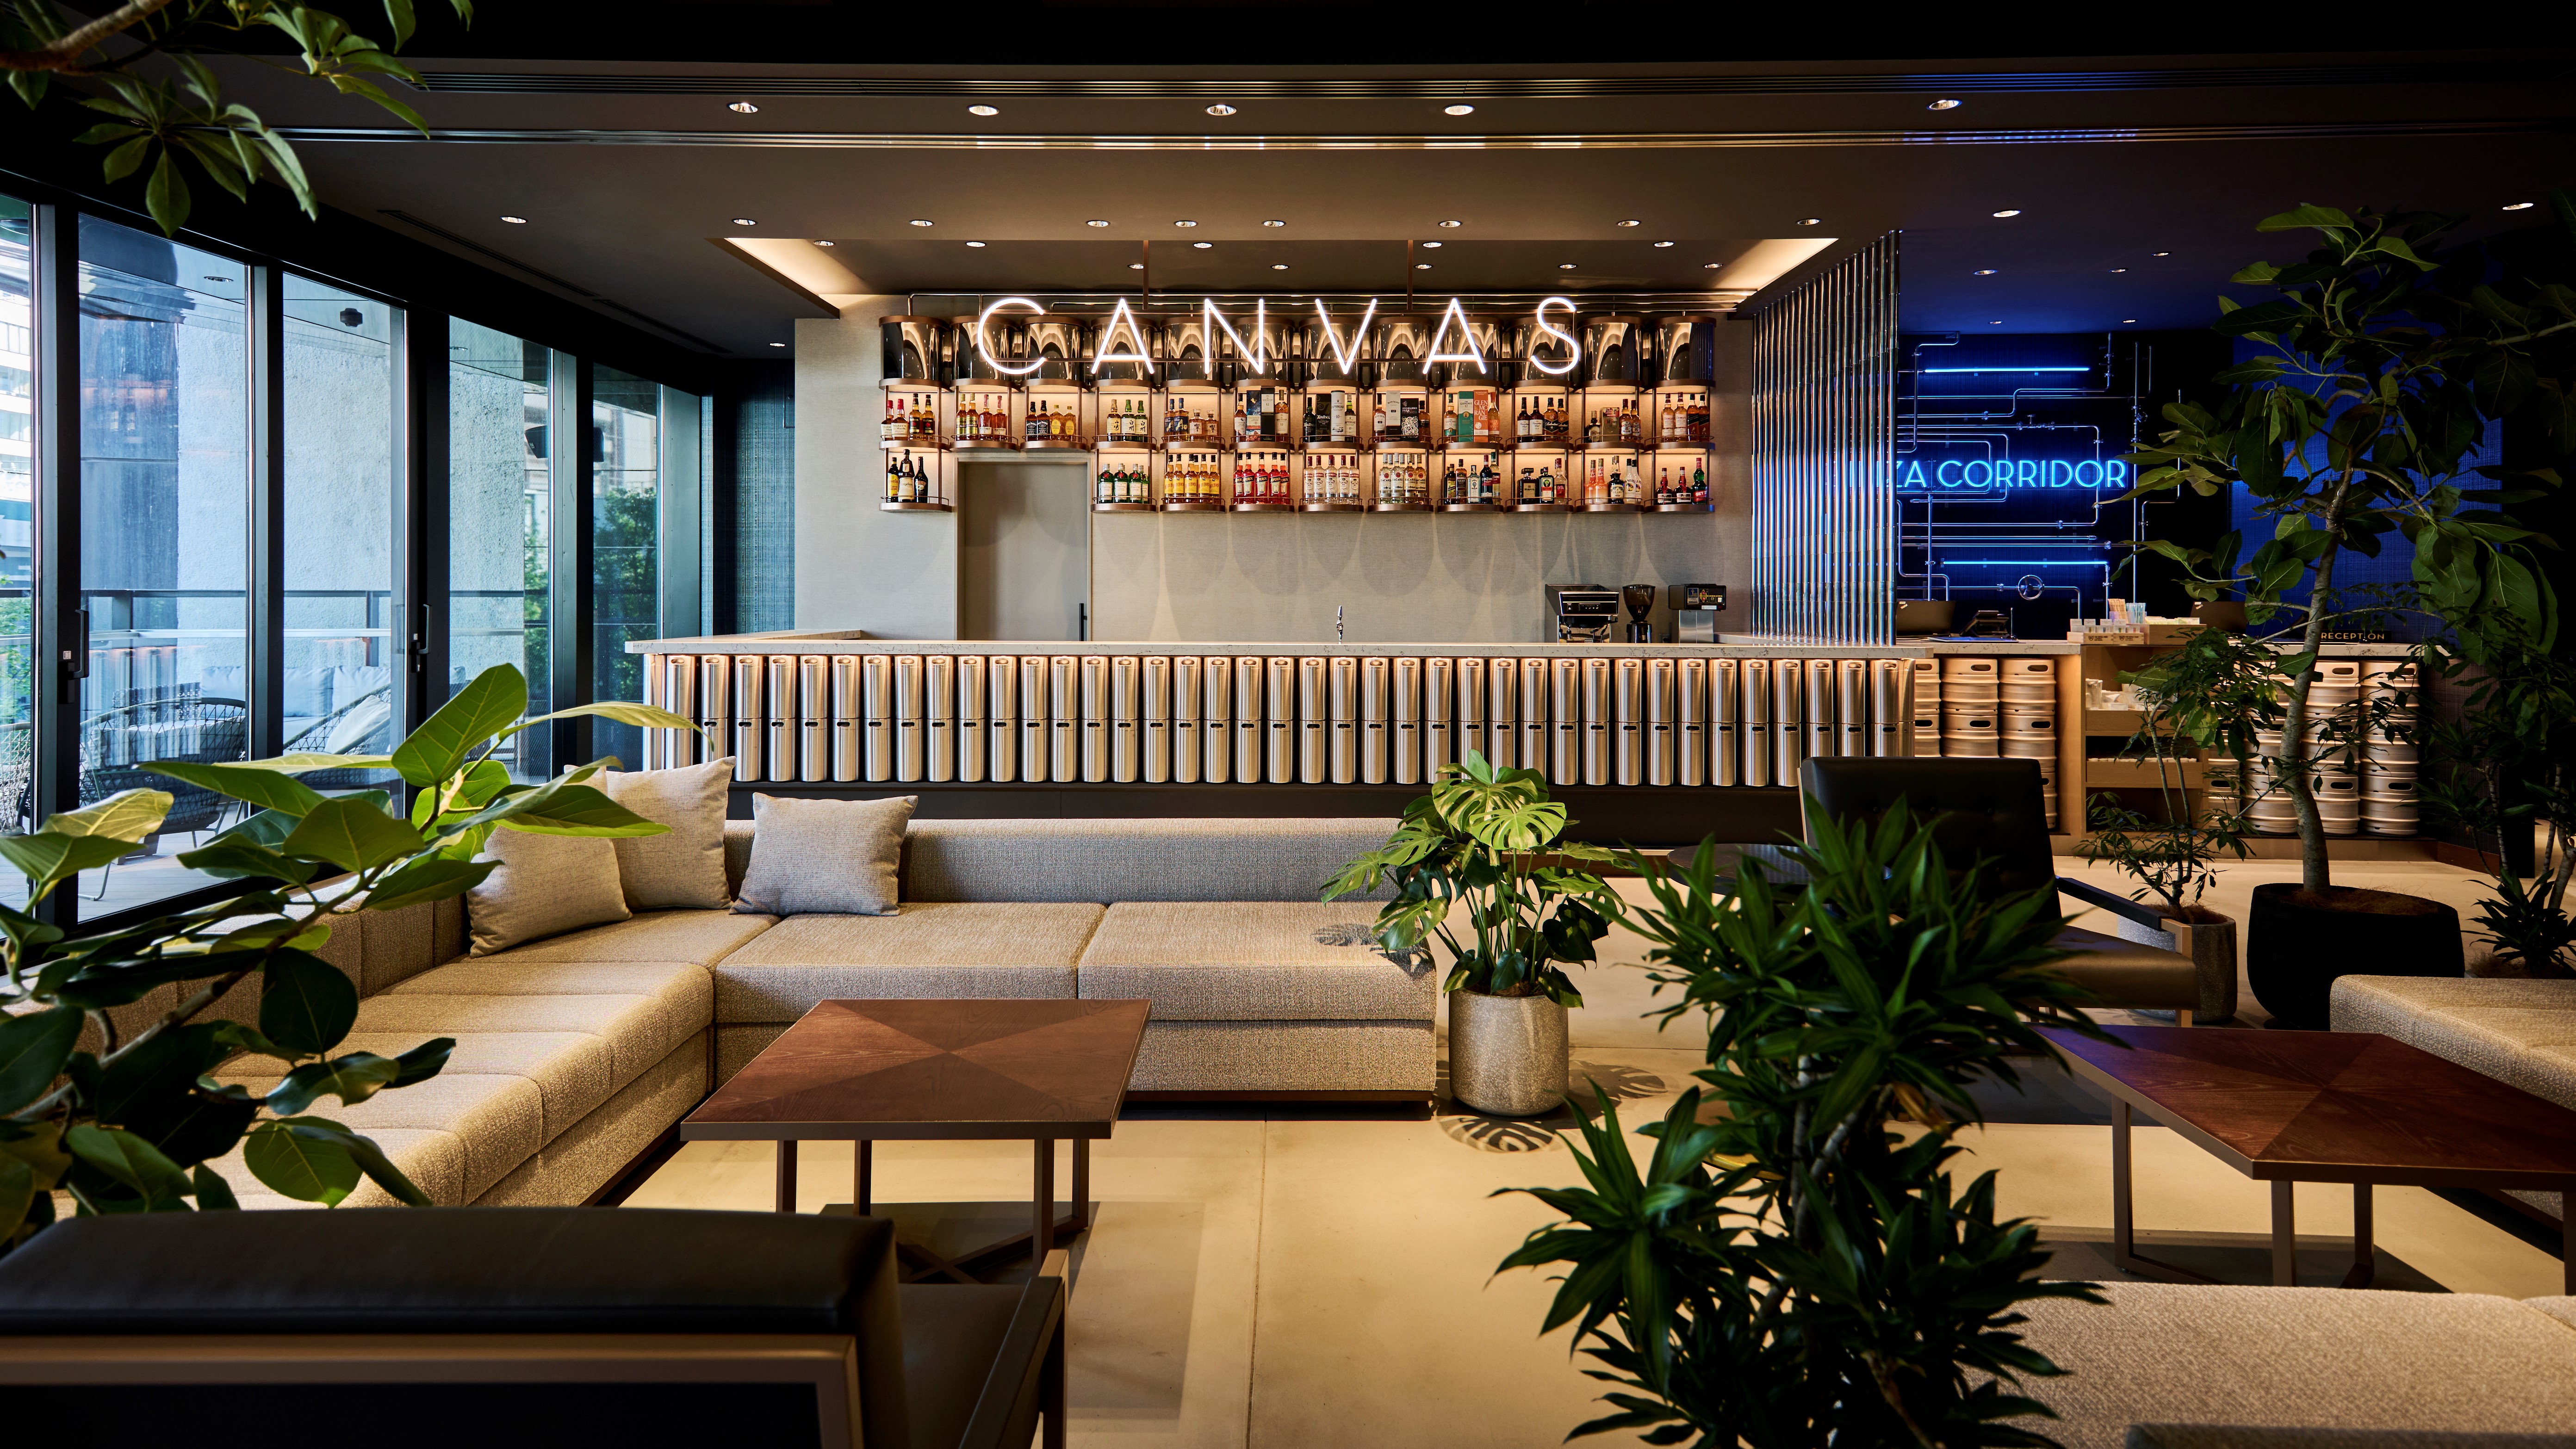 CANVAS LOUNGE produced by P.C.M.